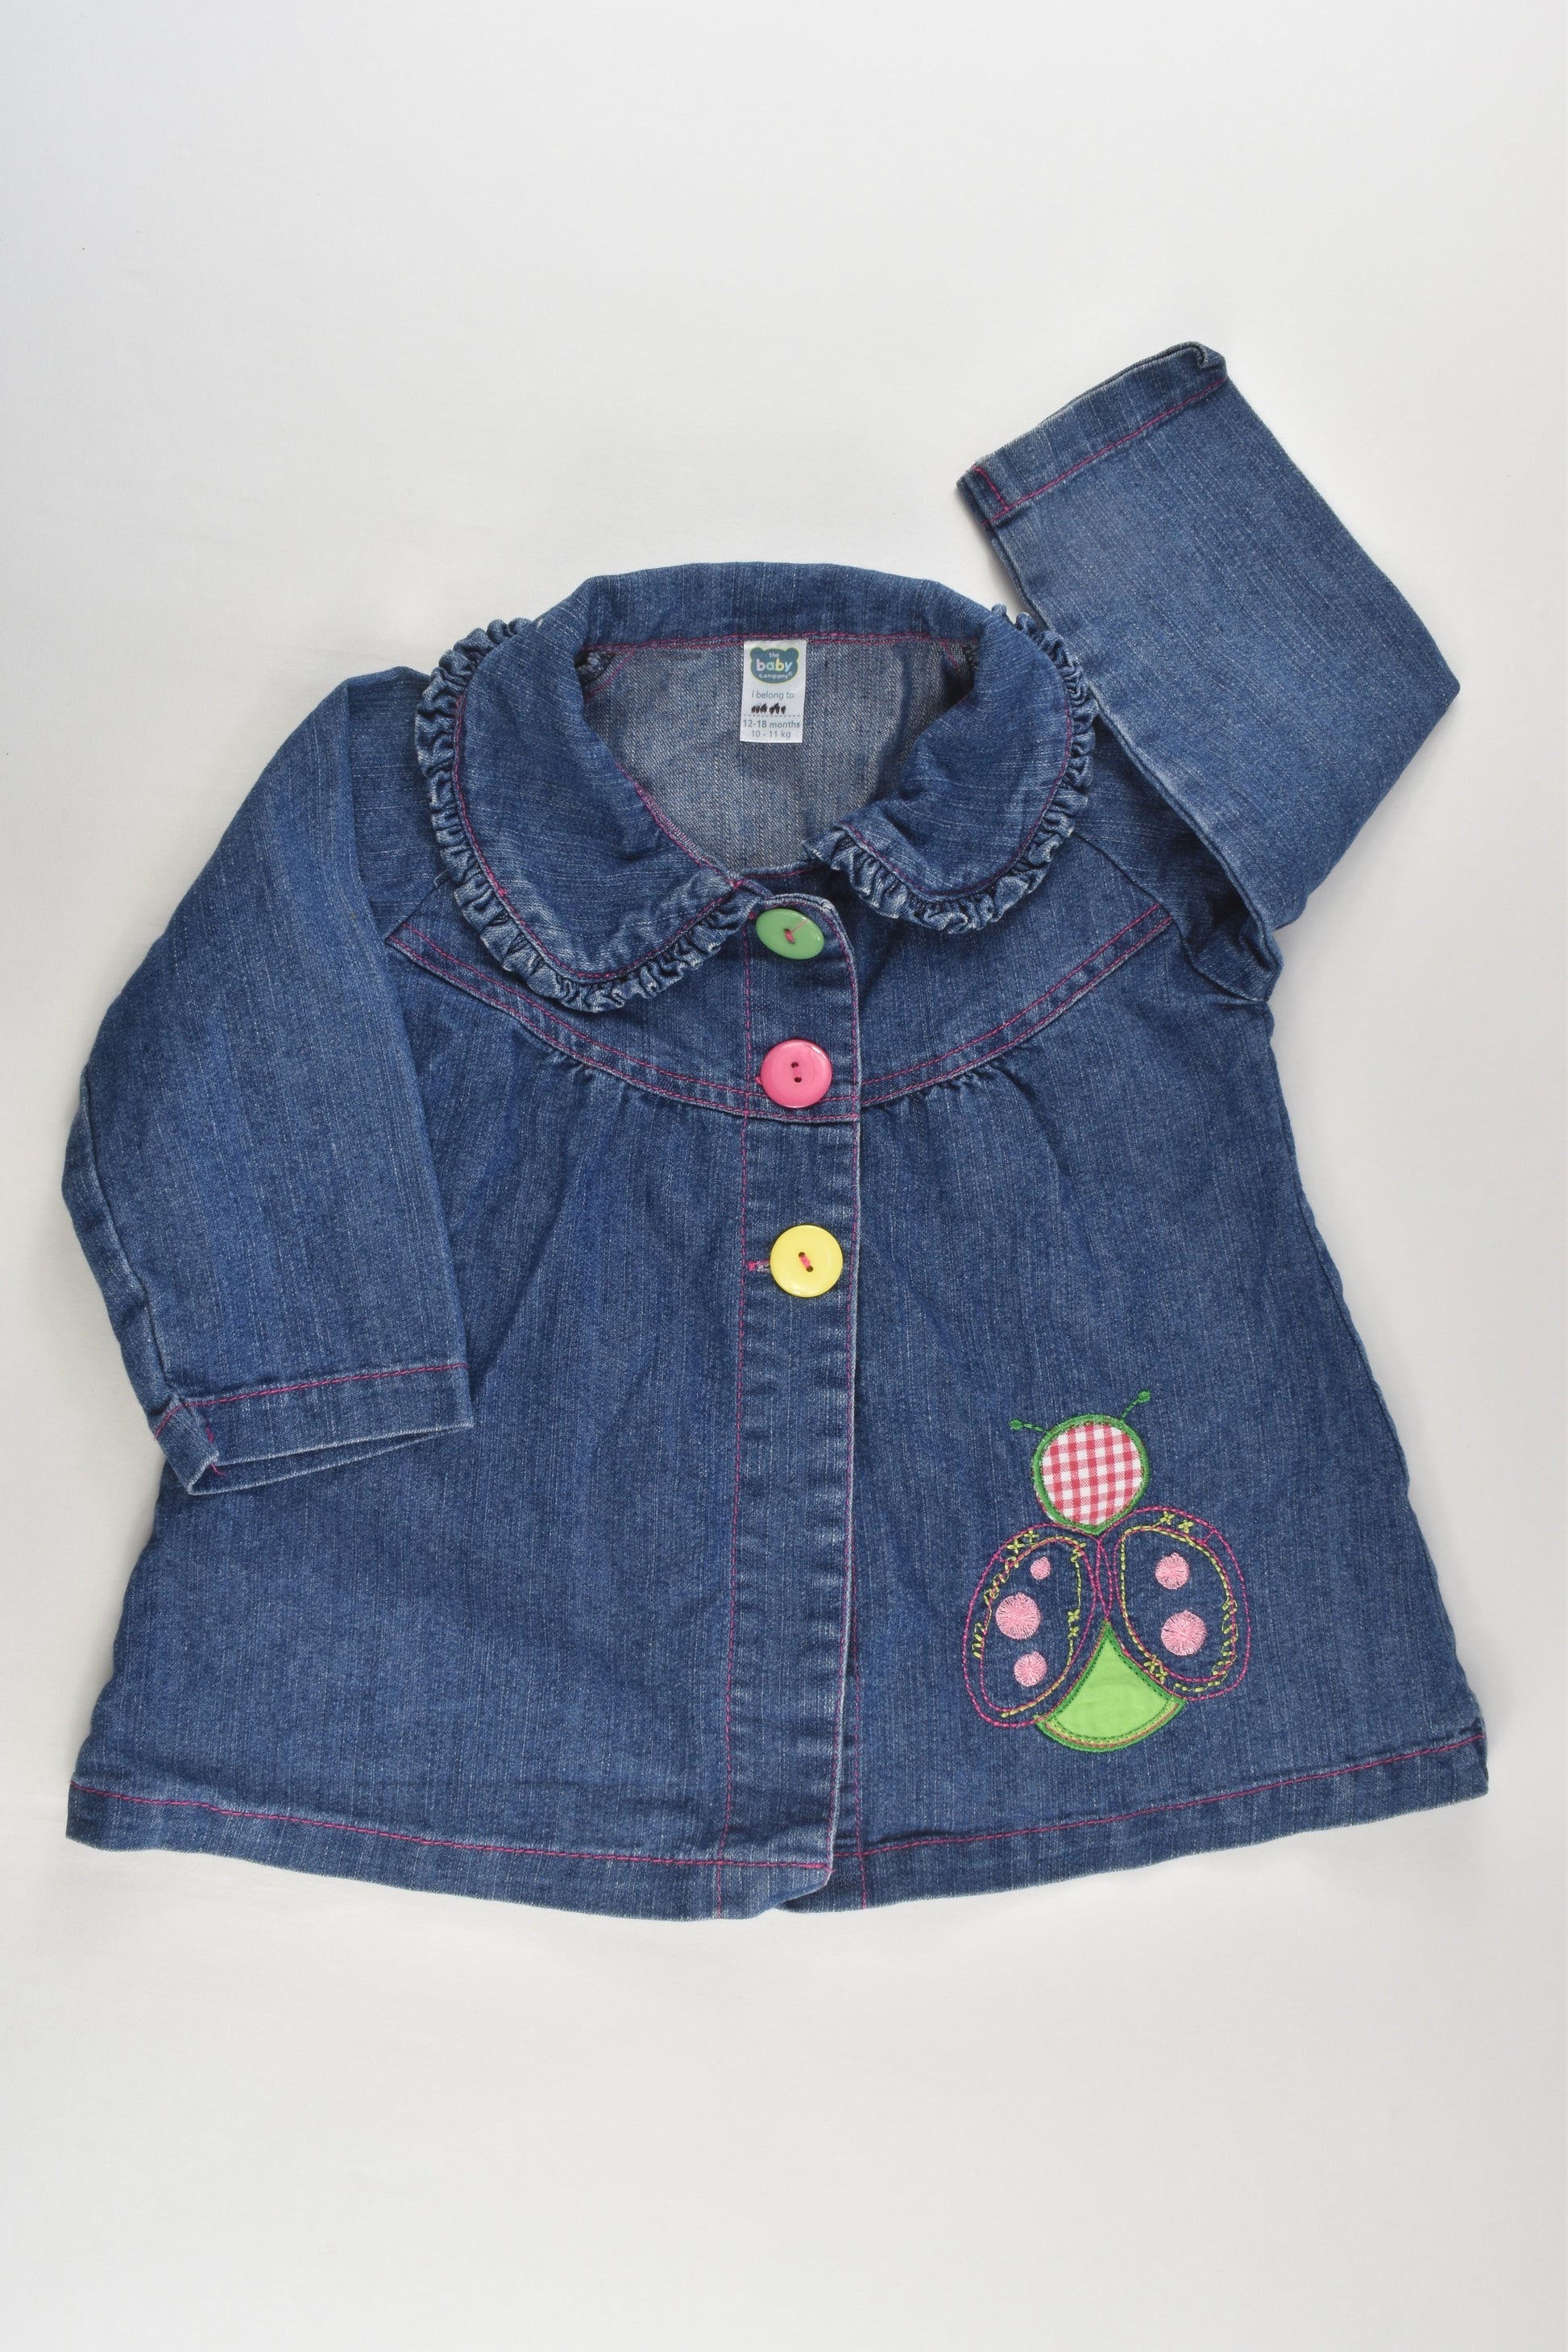 The Baby Company Size 1 Colourful Buttons and Ladybug Vintage (?) Denim Jacket